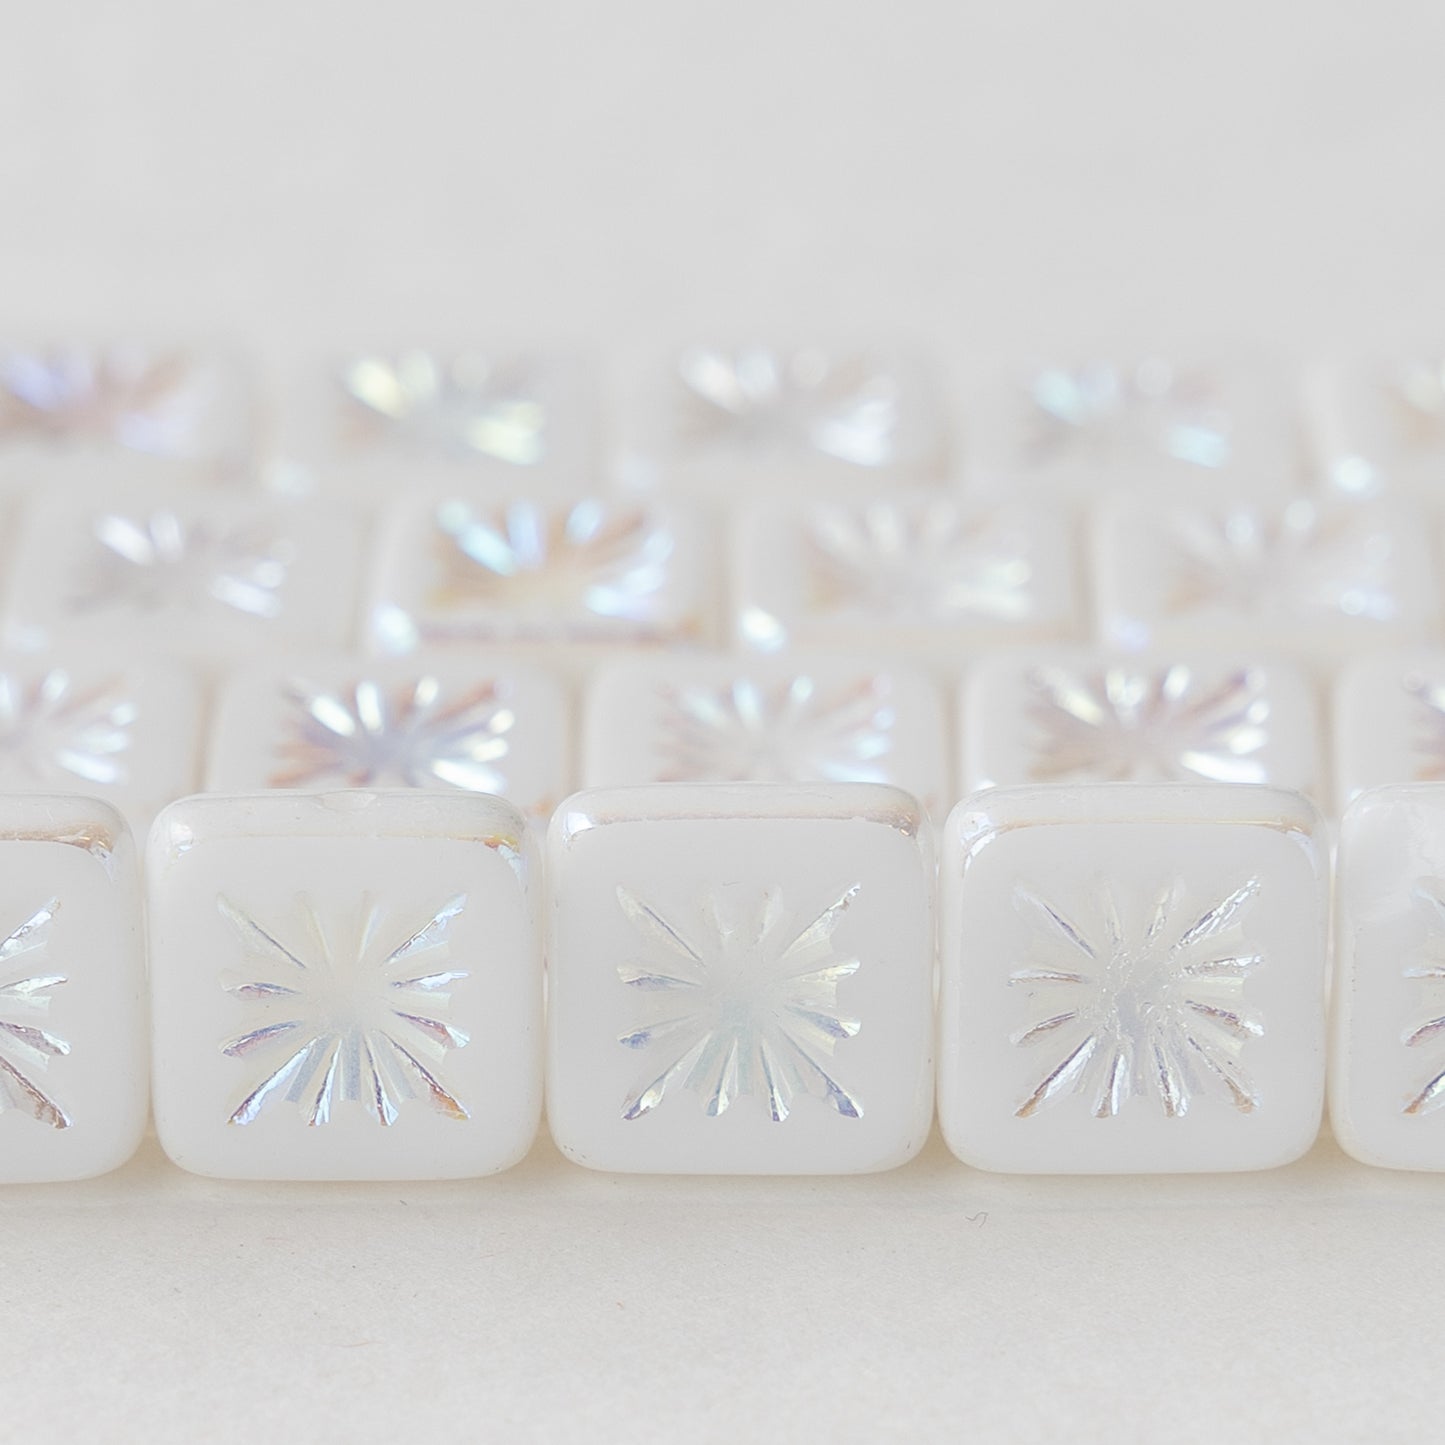 10mm Glass Tile Beads - Opaque White - 10